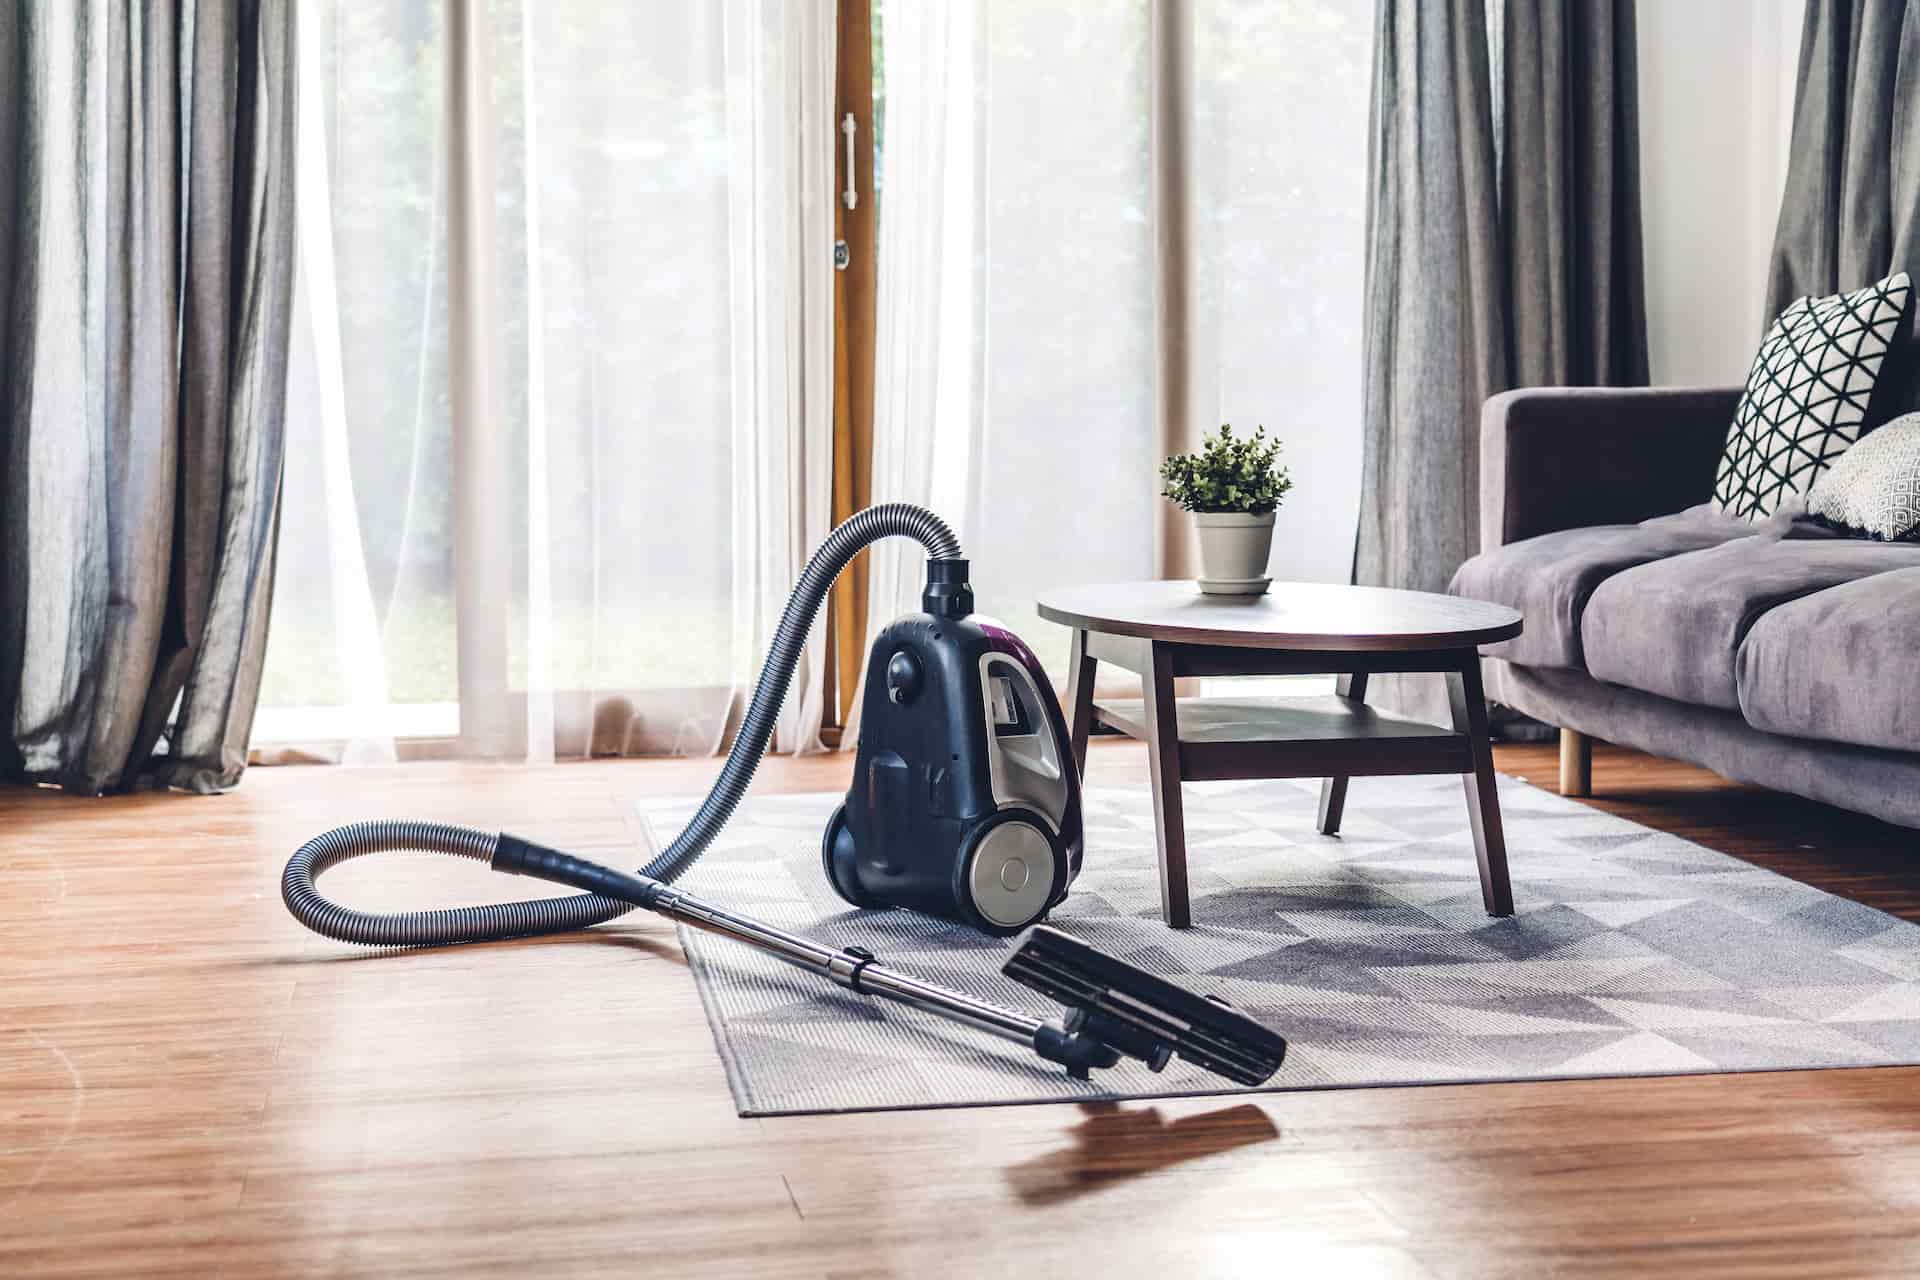 Let’s Get Sucked Into the World of Vacuum Cleaner Patents